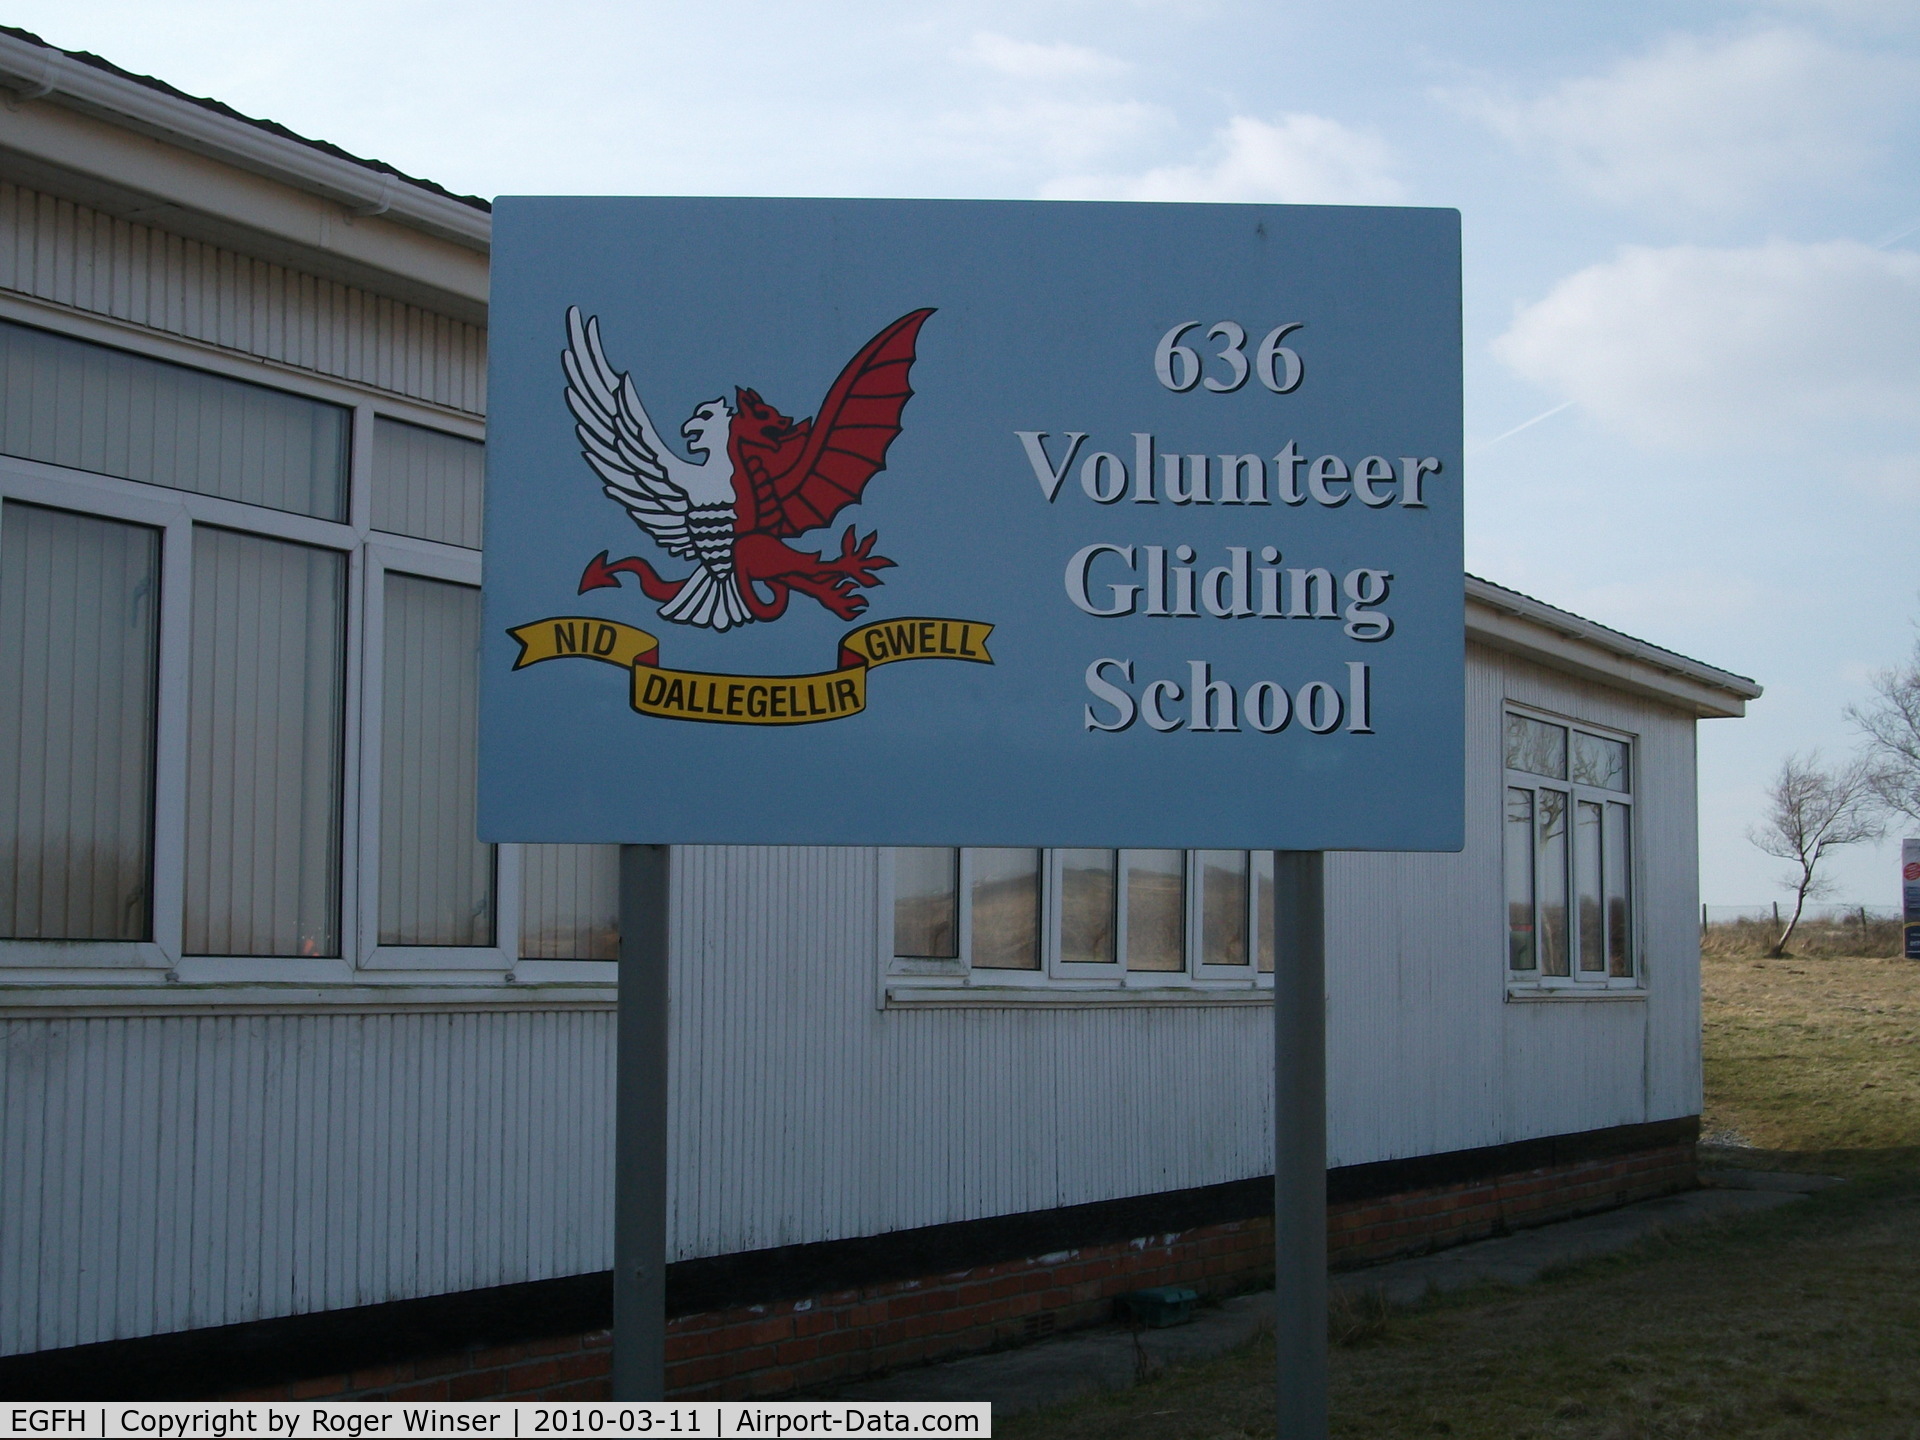 Swansea Airport, Swansea, Wales United Kingdom (EGFH) - Badge of 636 Volunteer Gliding Squadron. The unit was renamed Squadron (from School) in October 2008. 